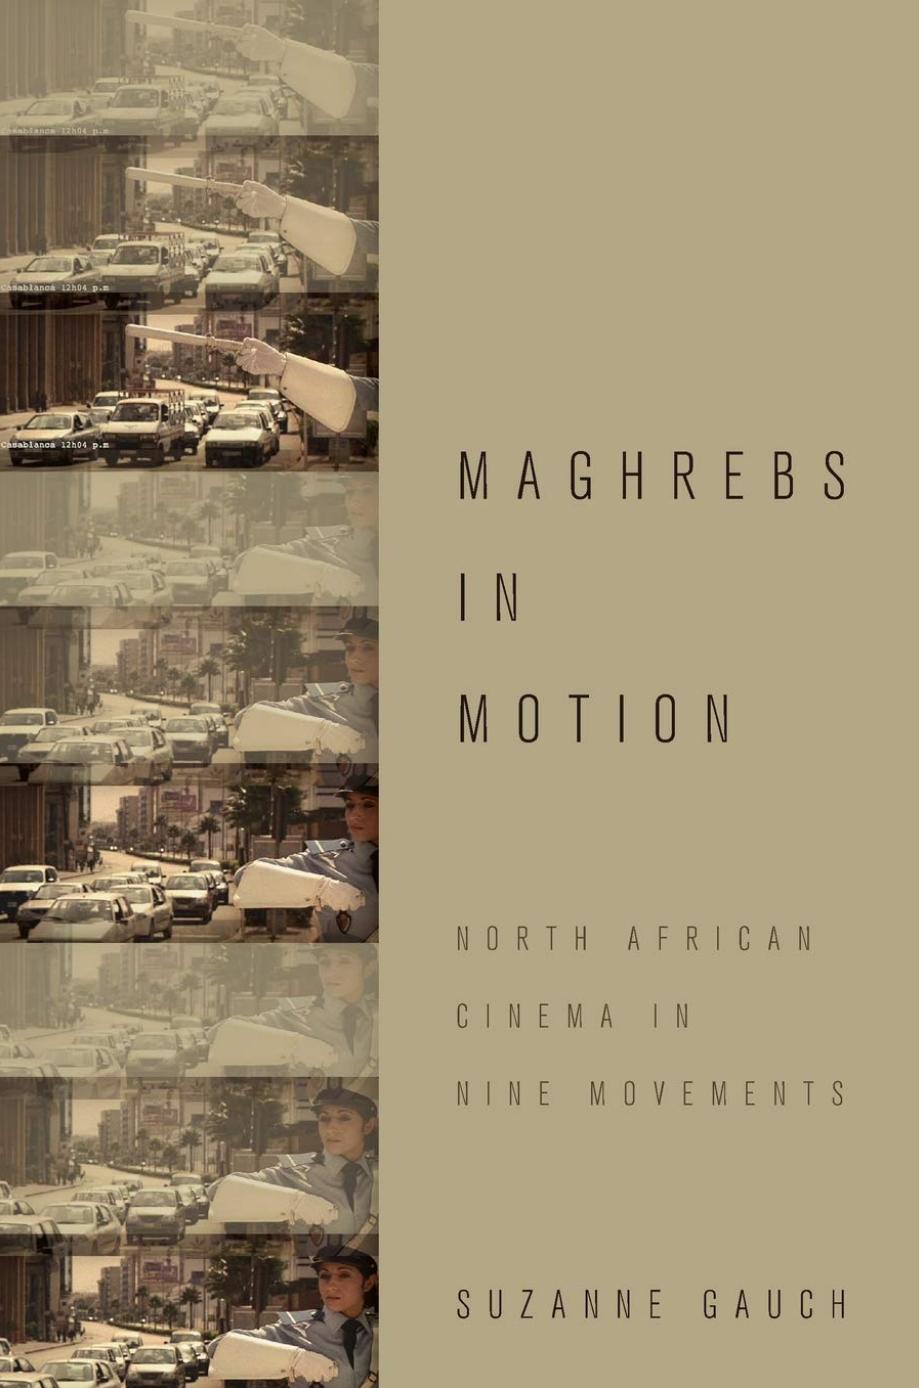 Maghrebs in Motion: North African Cinema in Nine Movements by Suzanne Gauch